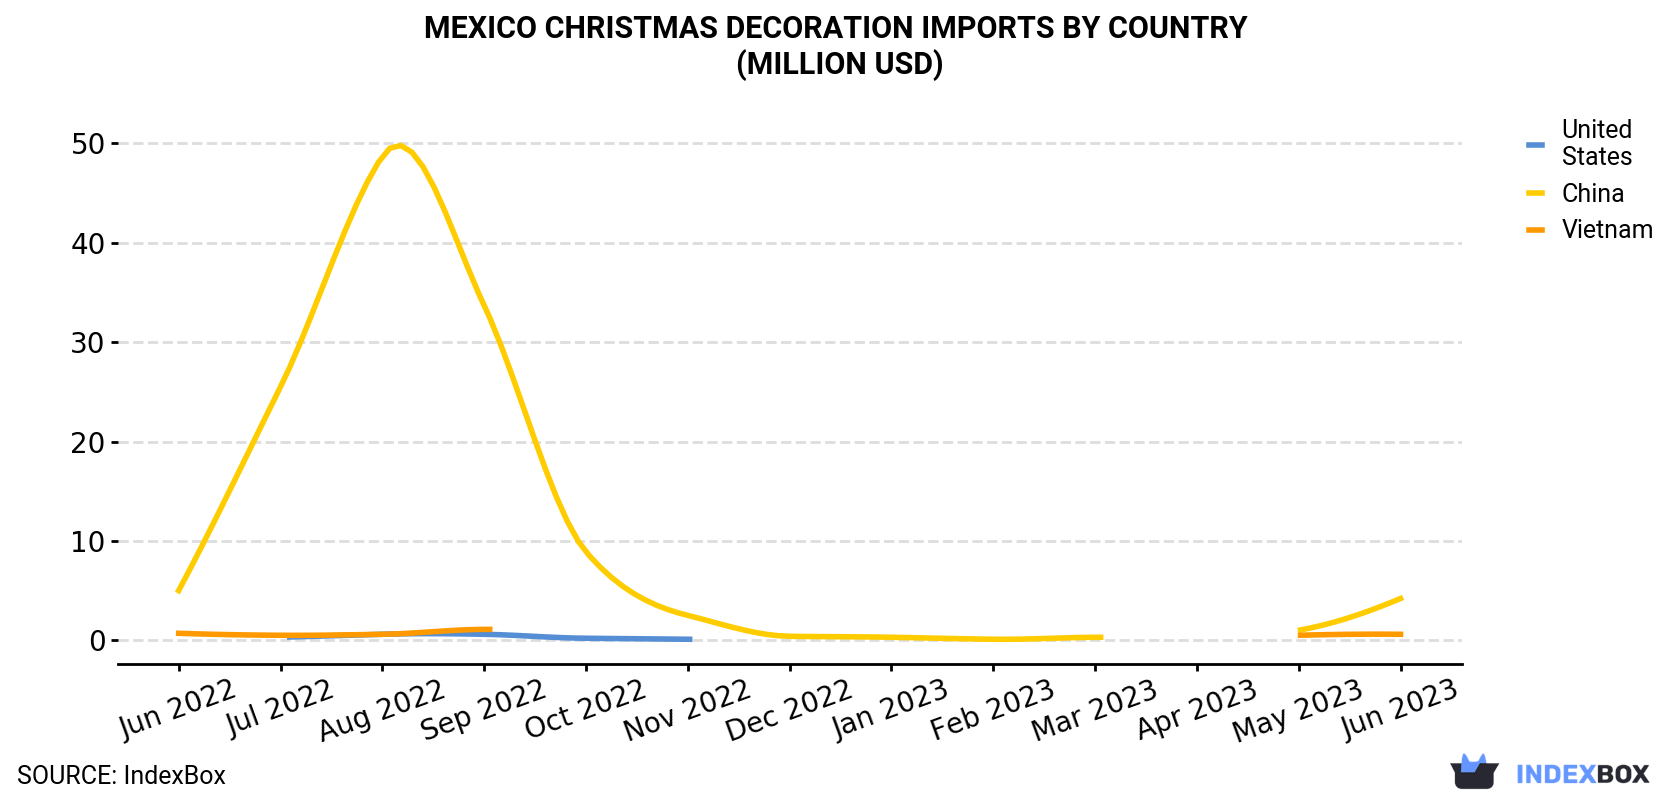 Mexico Christmas Decoration Imports By Country (Million USD)